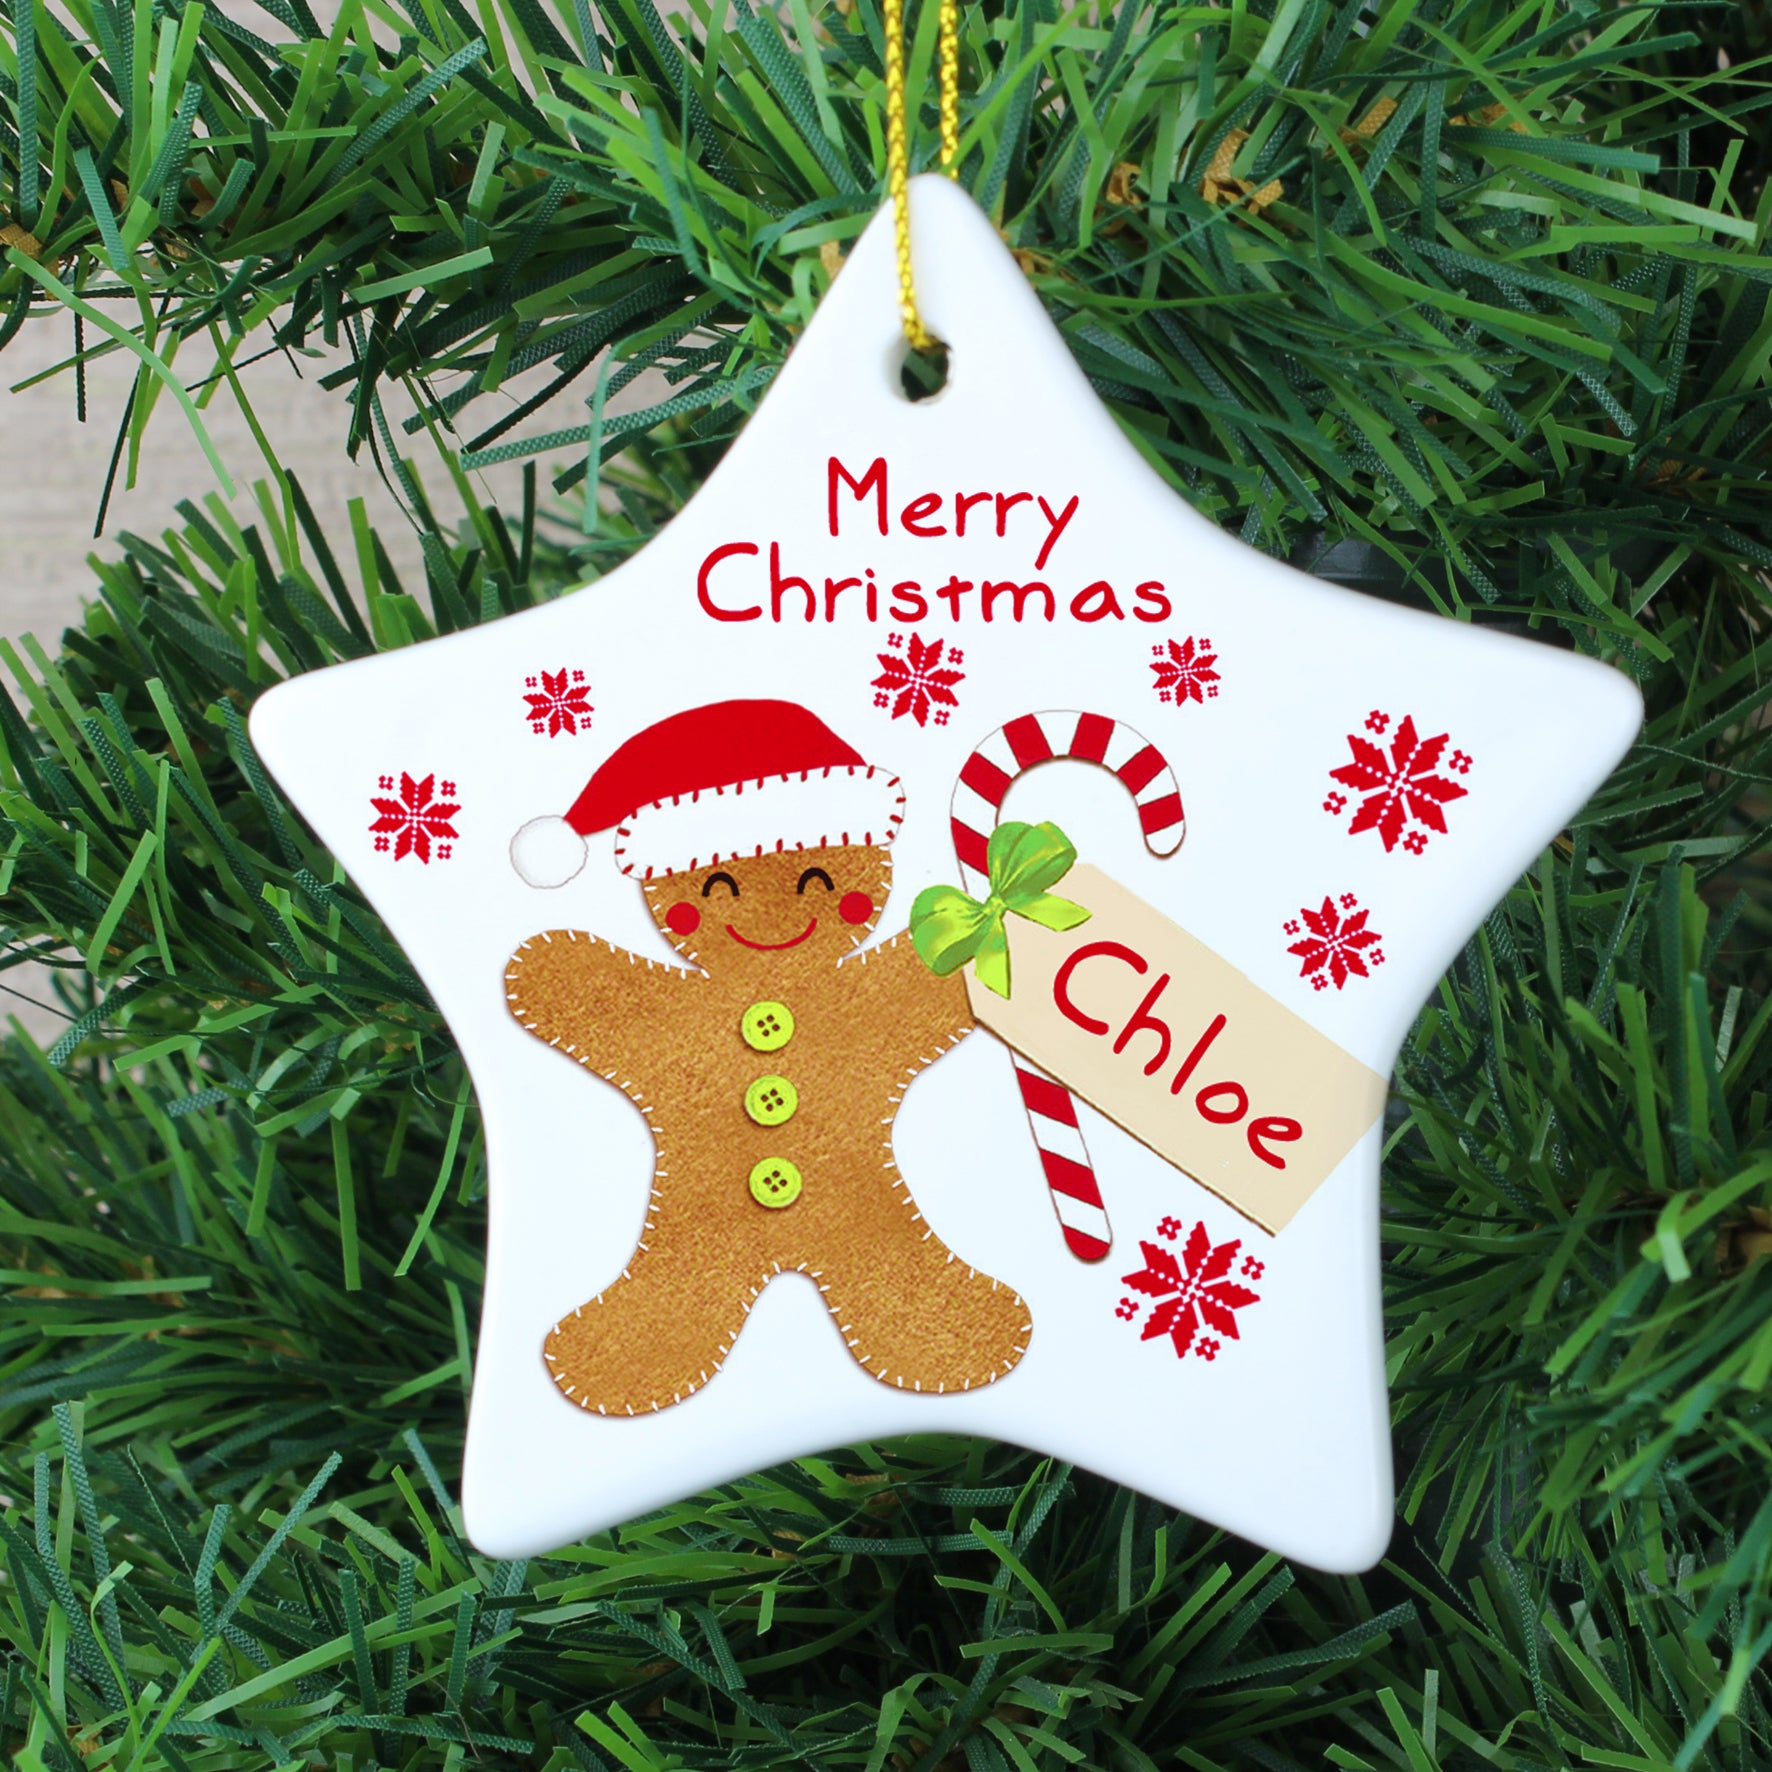 Personalised white ceramic star shaped Christmas decoration featuring an image of a hand-drawn gingerbread man holding a candy cane which can be personalised with a name of your choice.